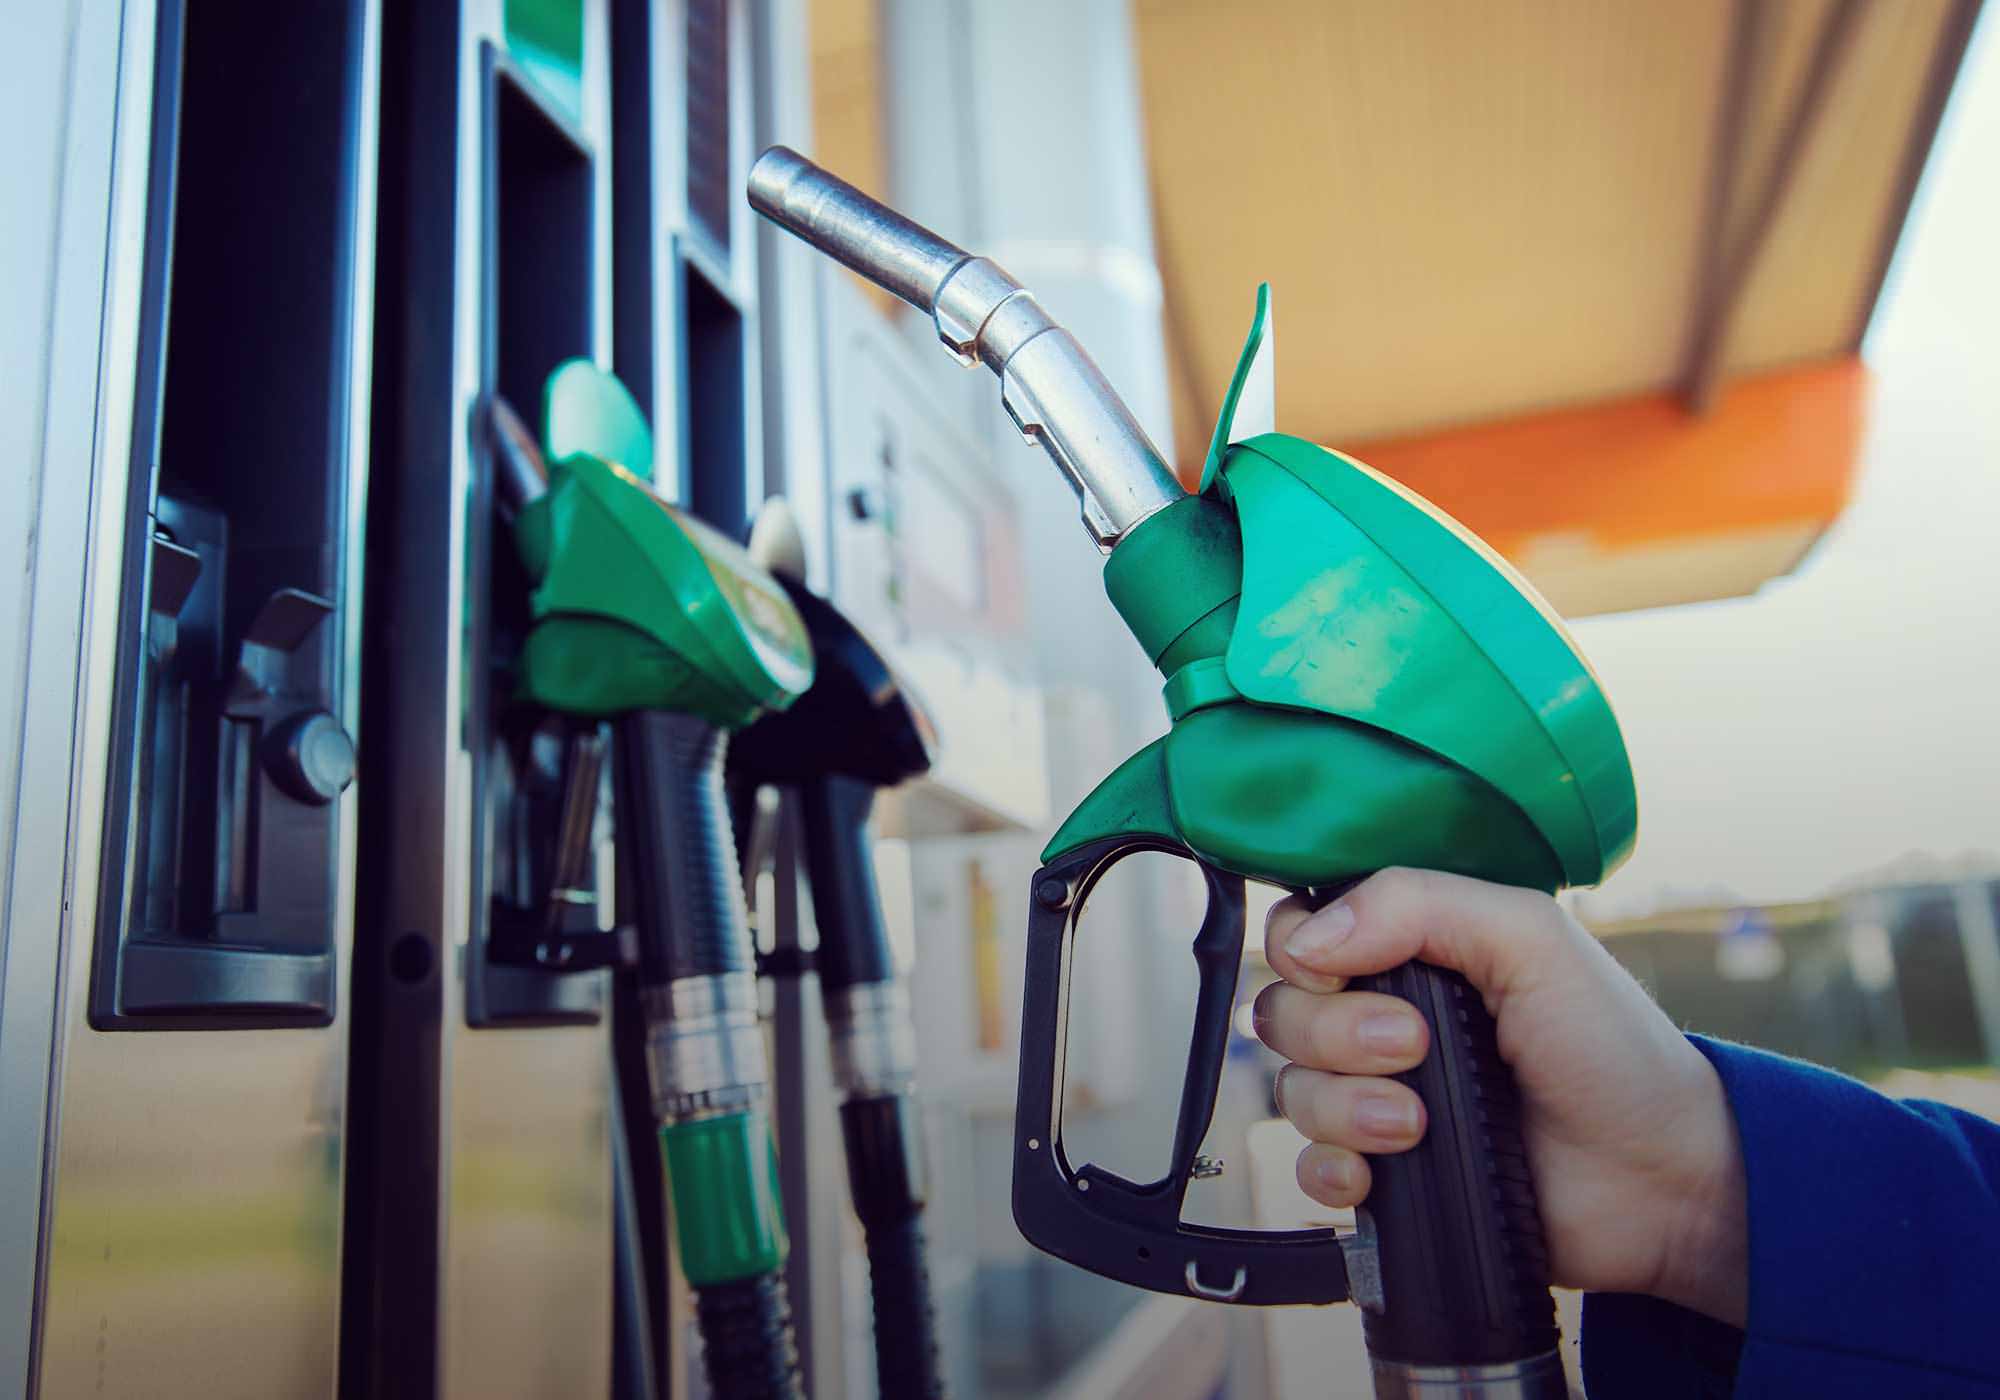 What's the difference between petrol and diesel cars?